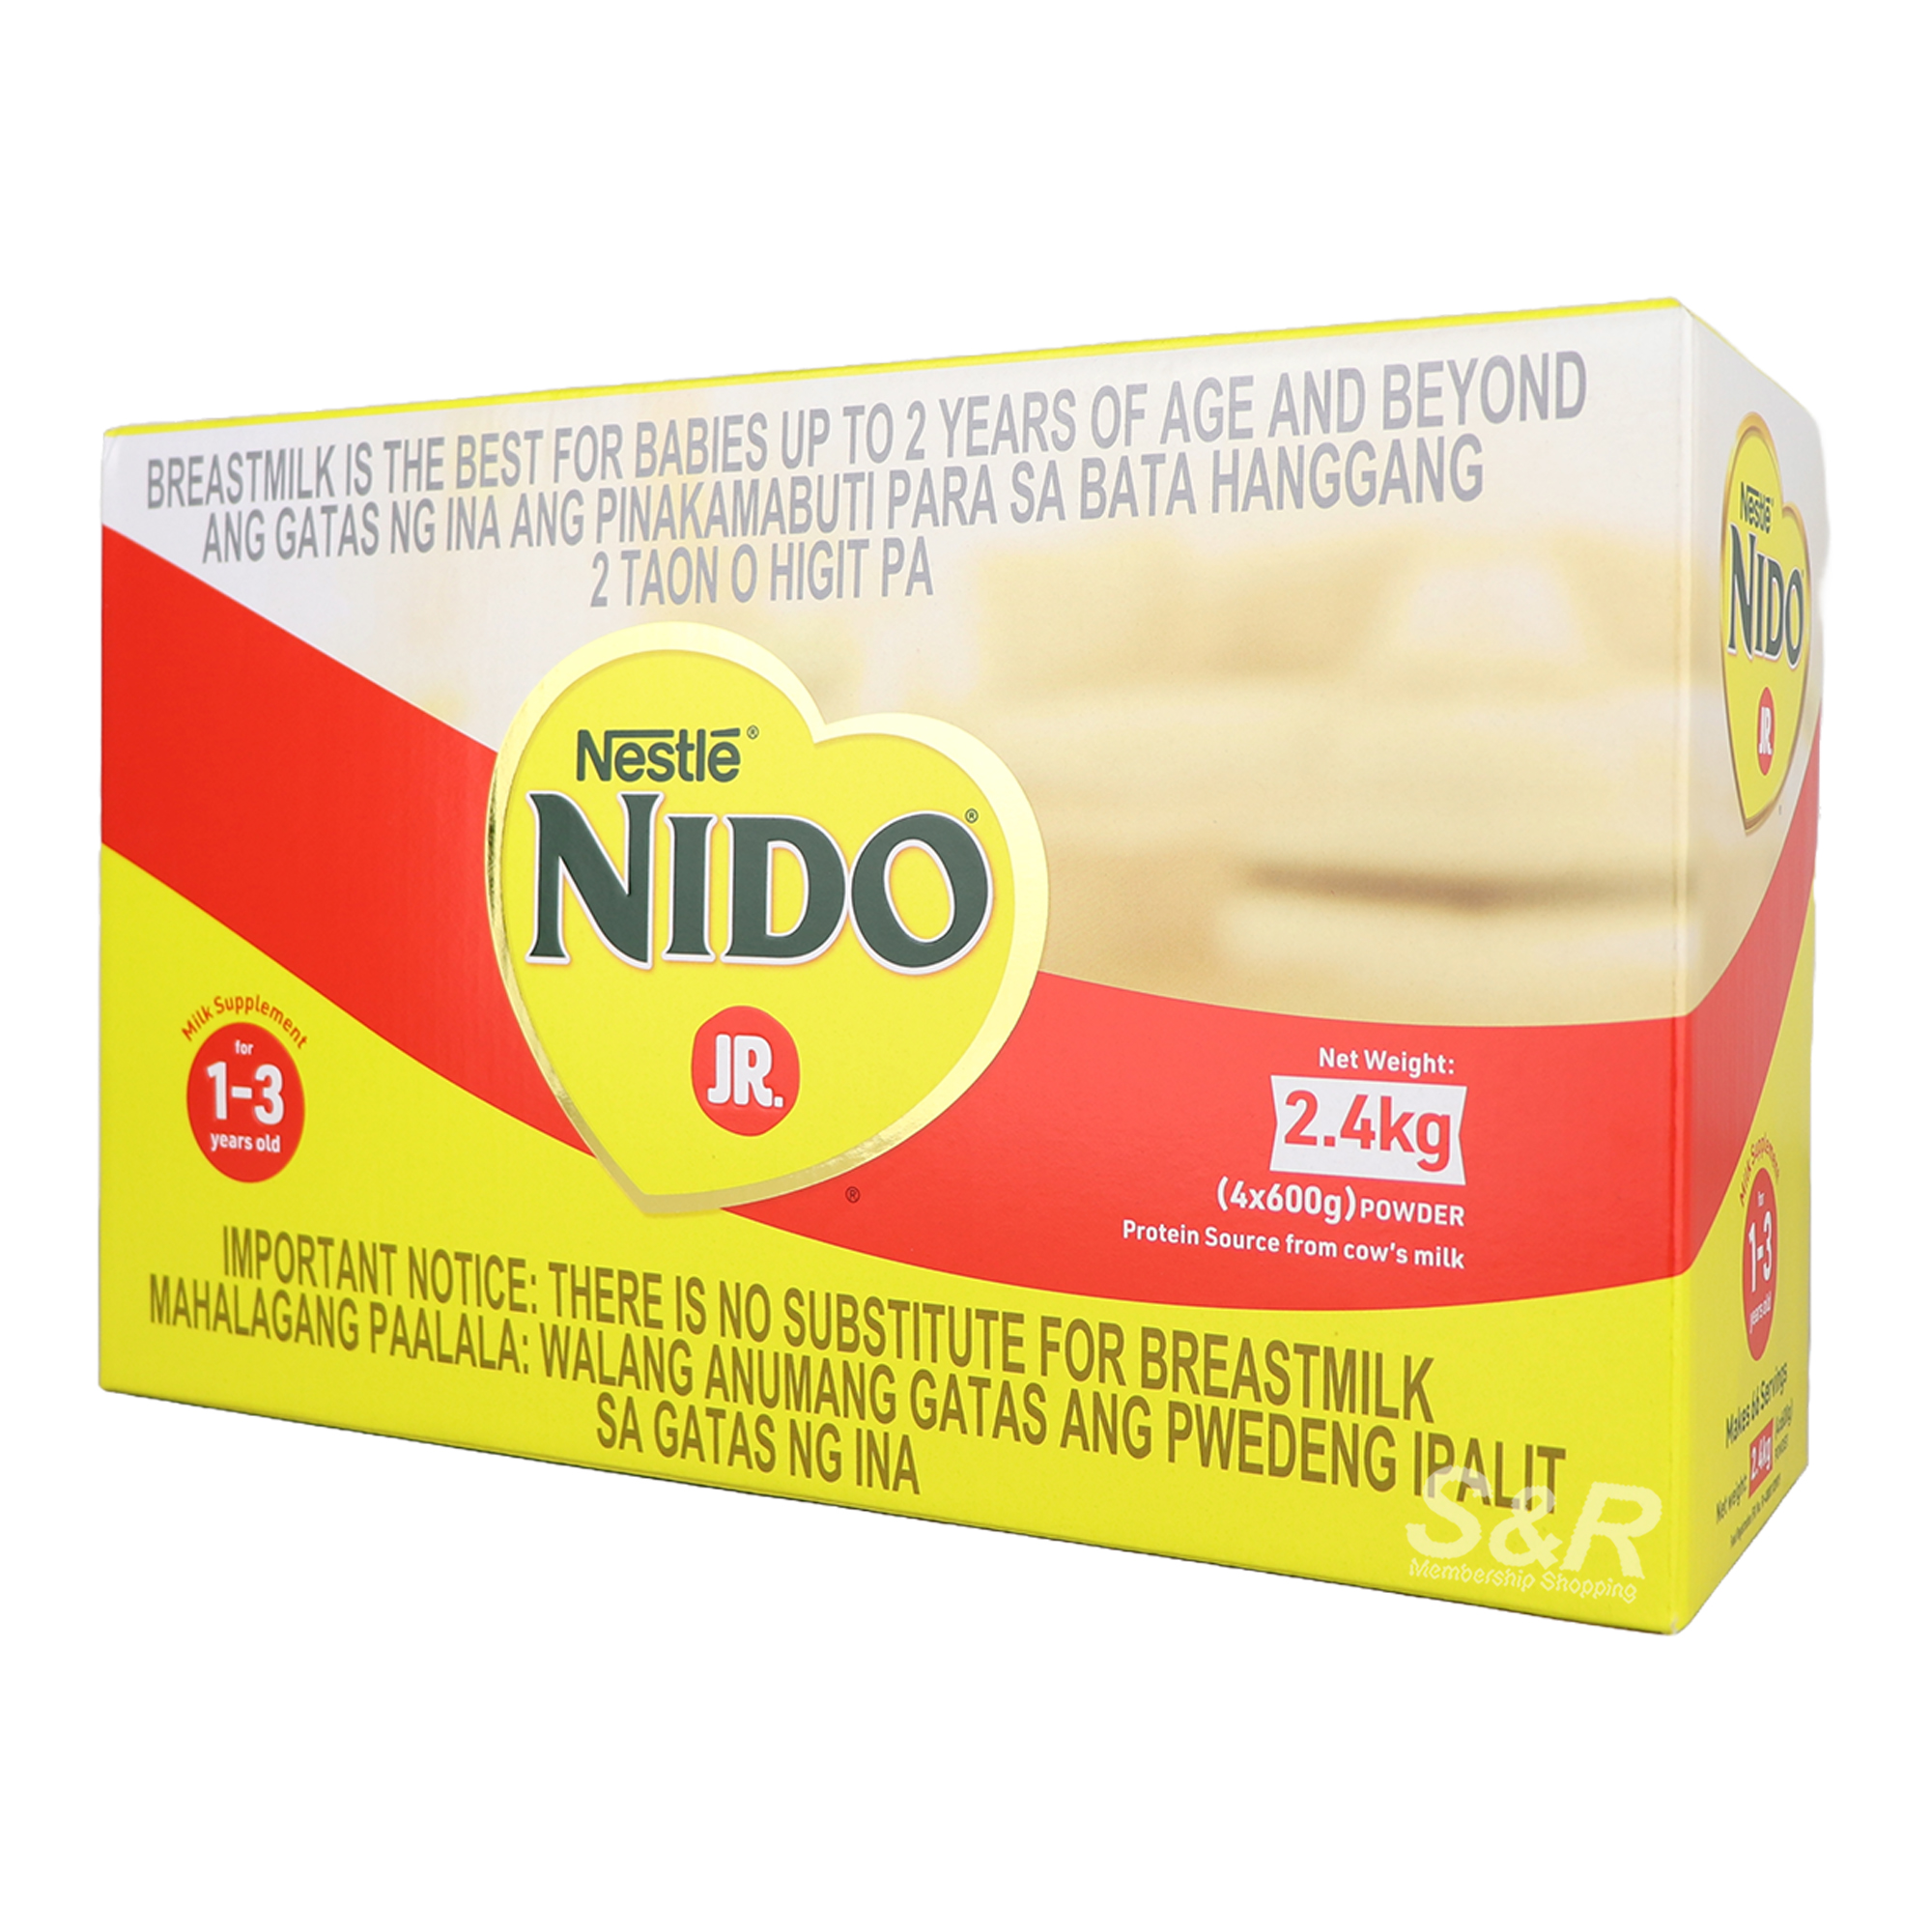 Nestle's Nido Junior Ages 1-3 Years Old 2.4kg